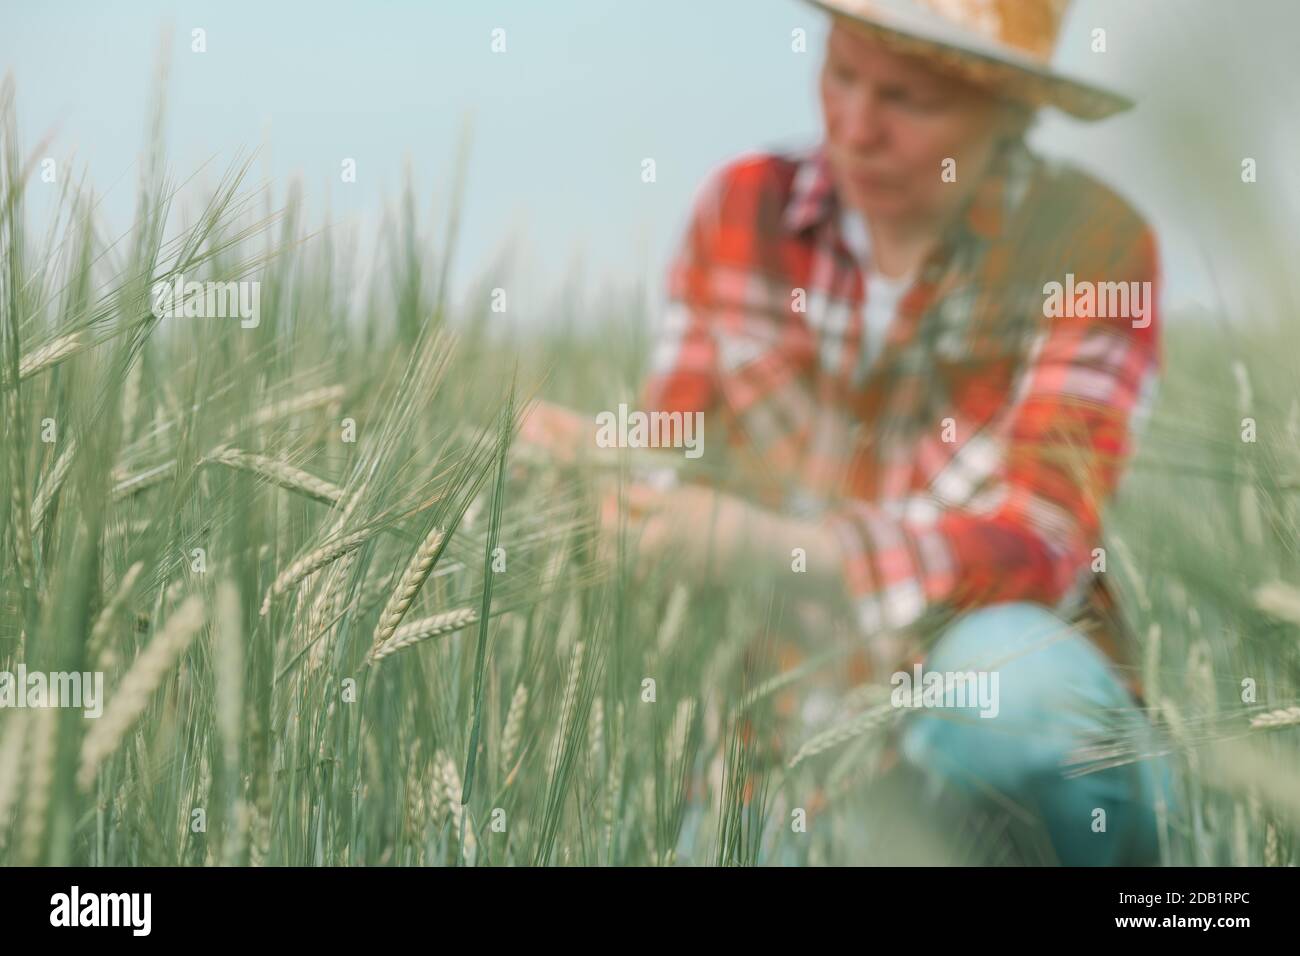 Female agronomist farmer examining development of green barley ears in field, woman agriculturist working on cereal crop plantation, selective focus Stock Photo